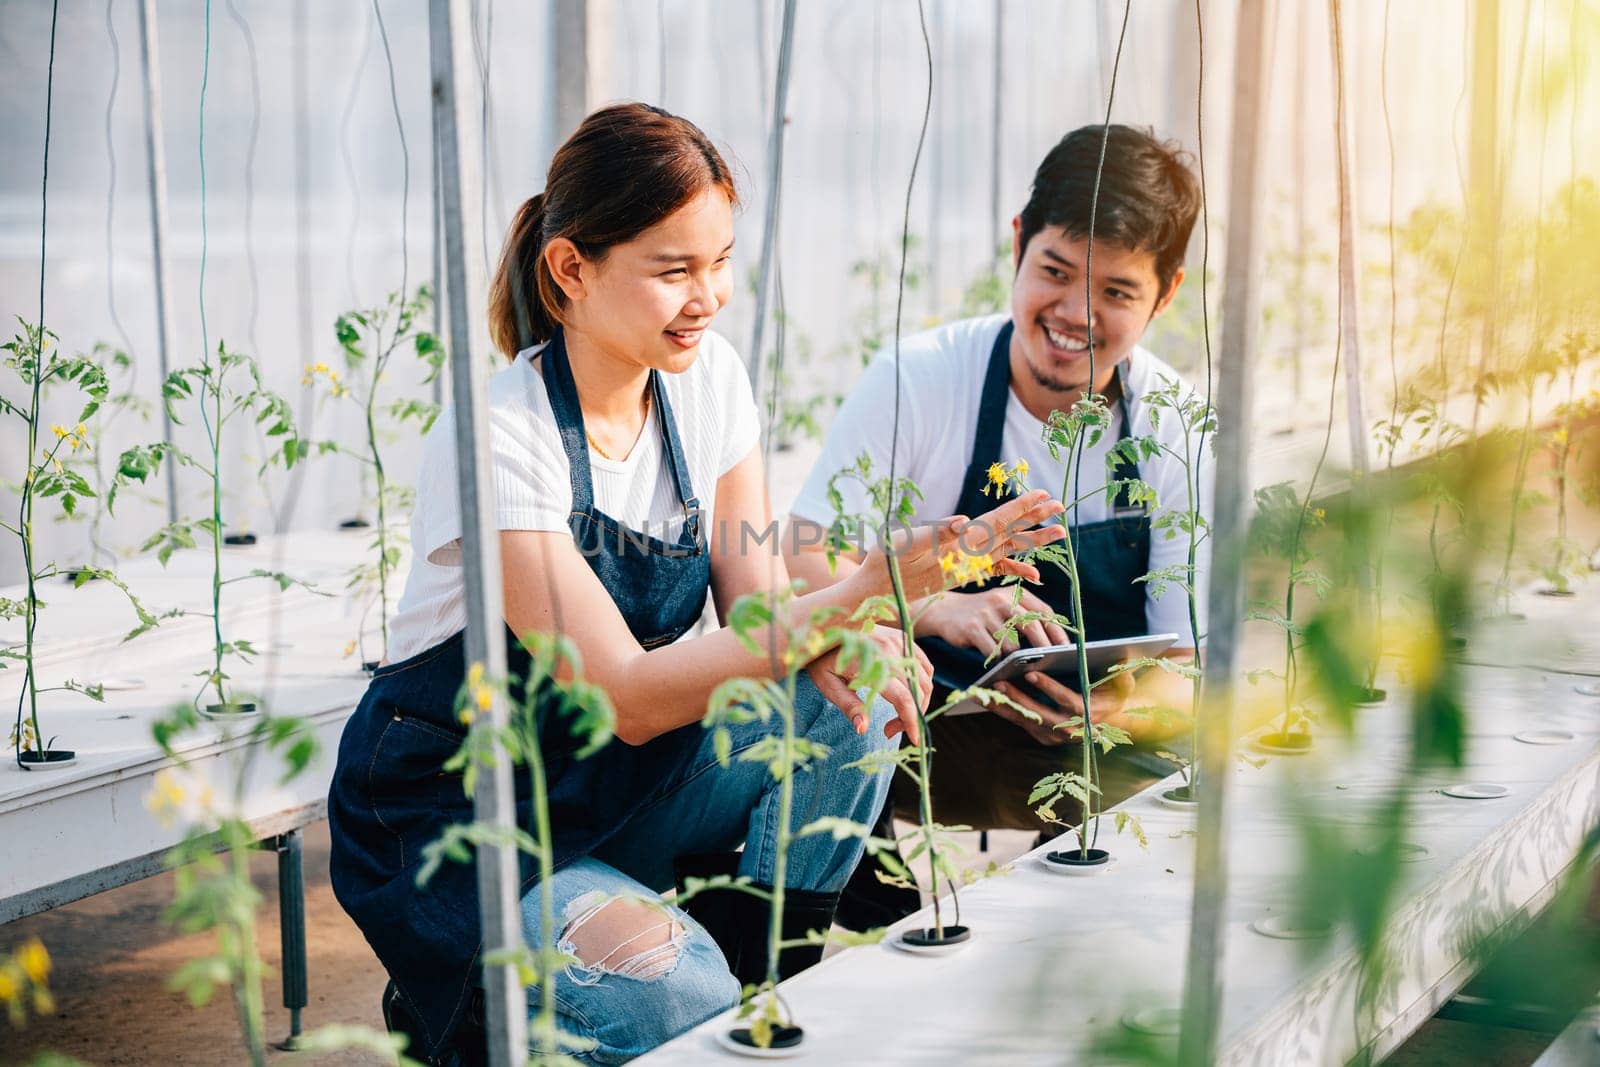 Cheerful Asian couple proud farmers happily working in greenhouse holding organic tomatoes and vegetables. Their confidence happiness reflect successful family-owned business in modern horticulture.